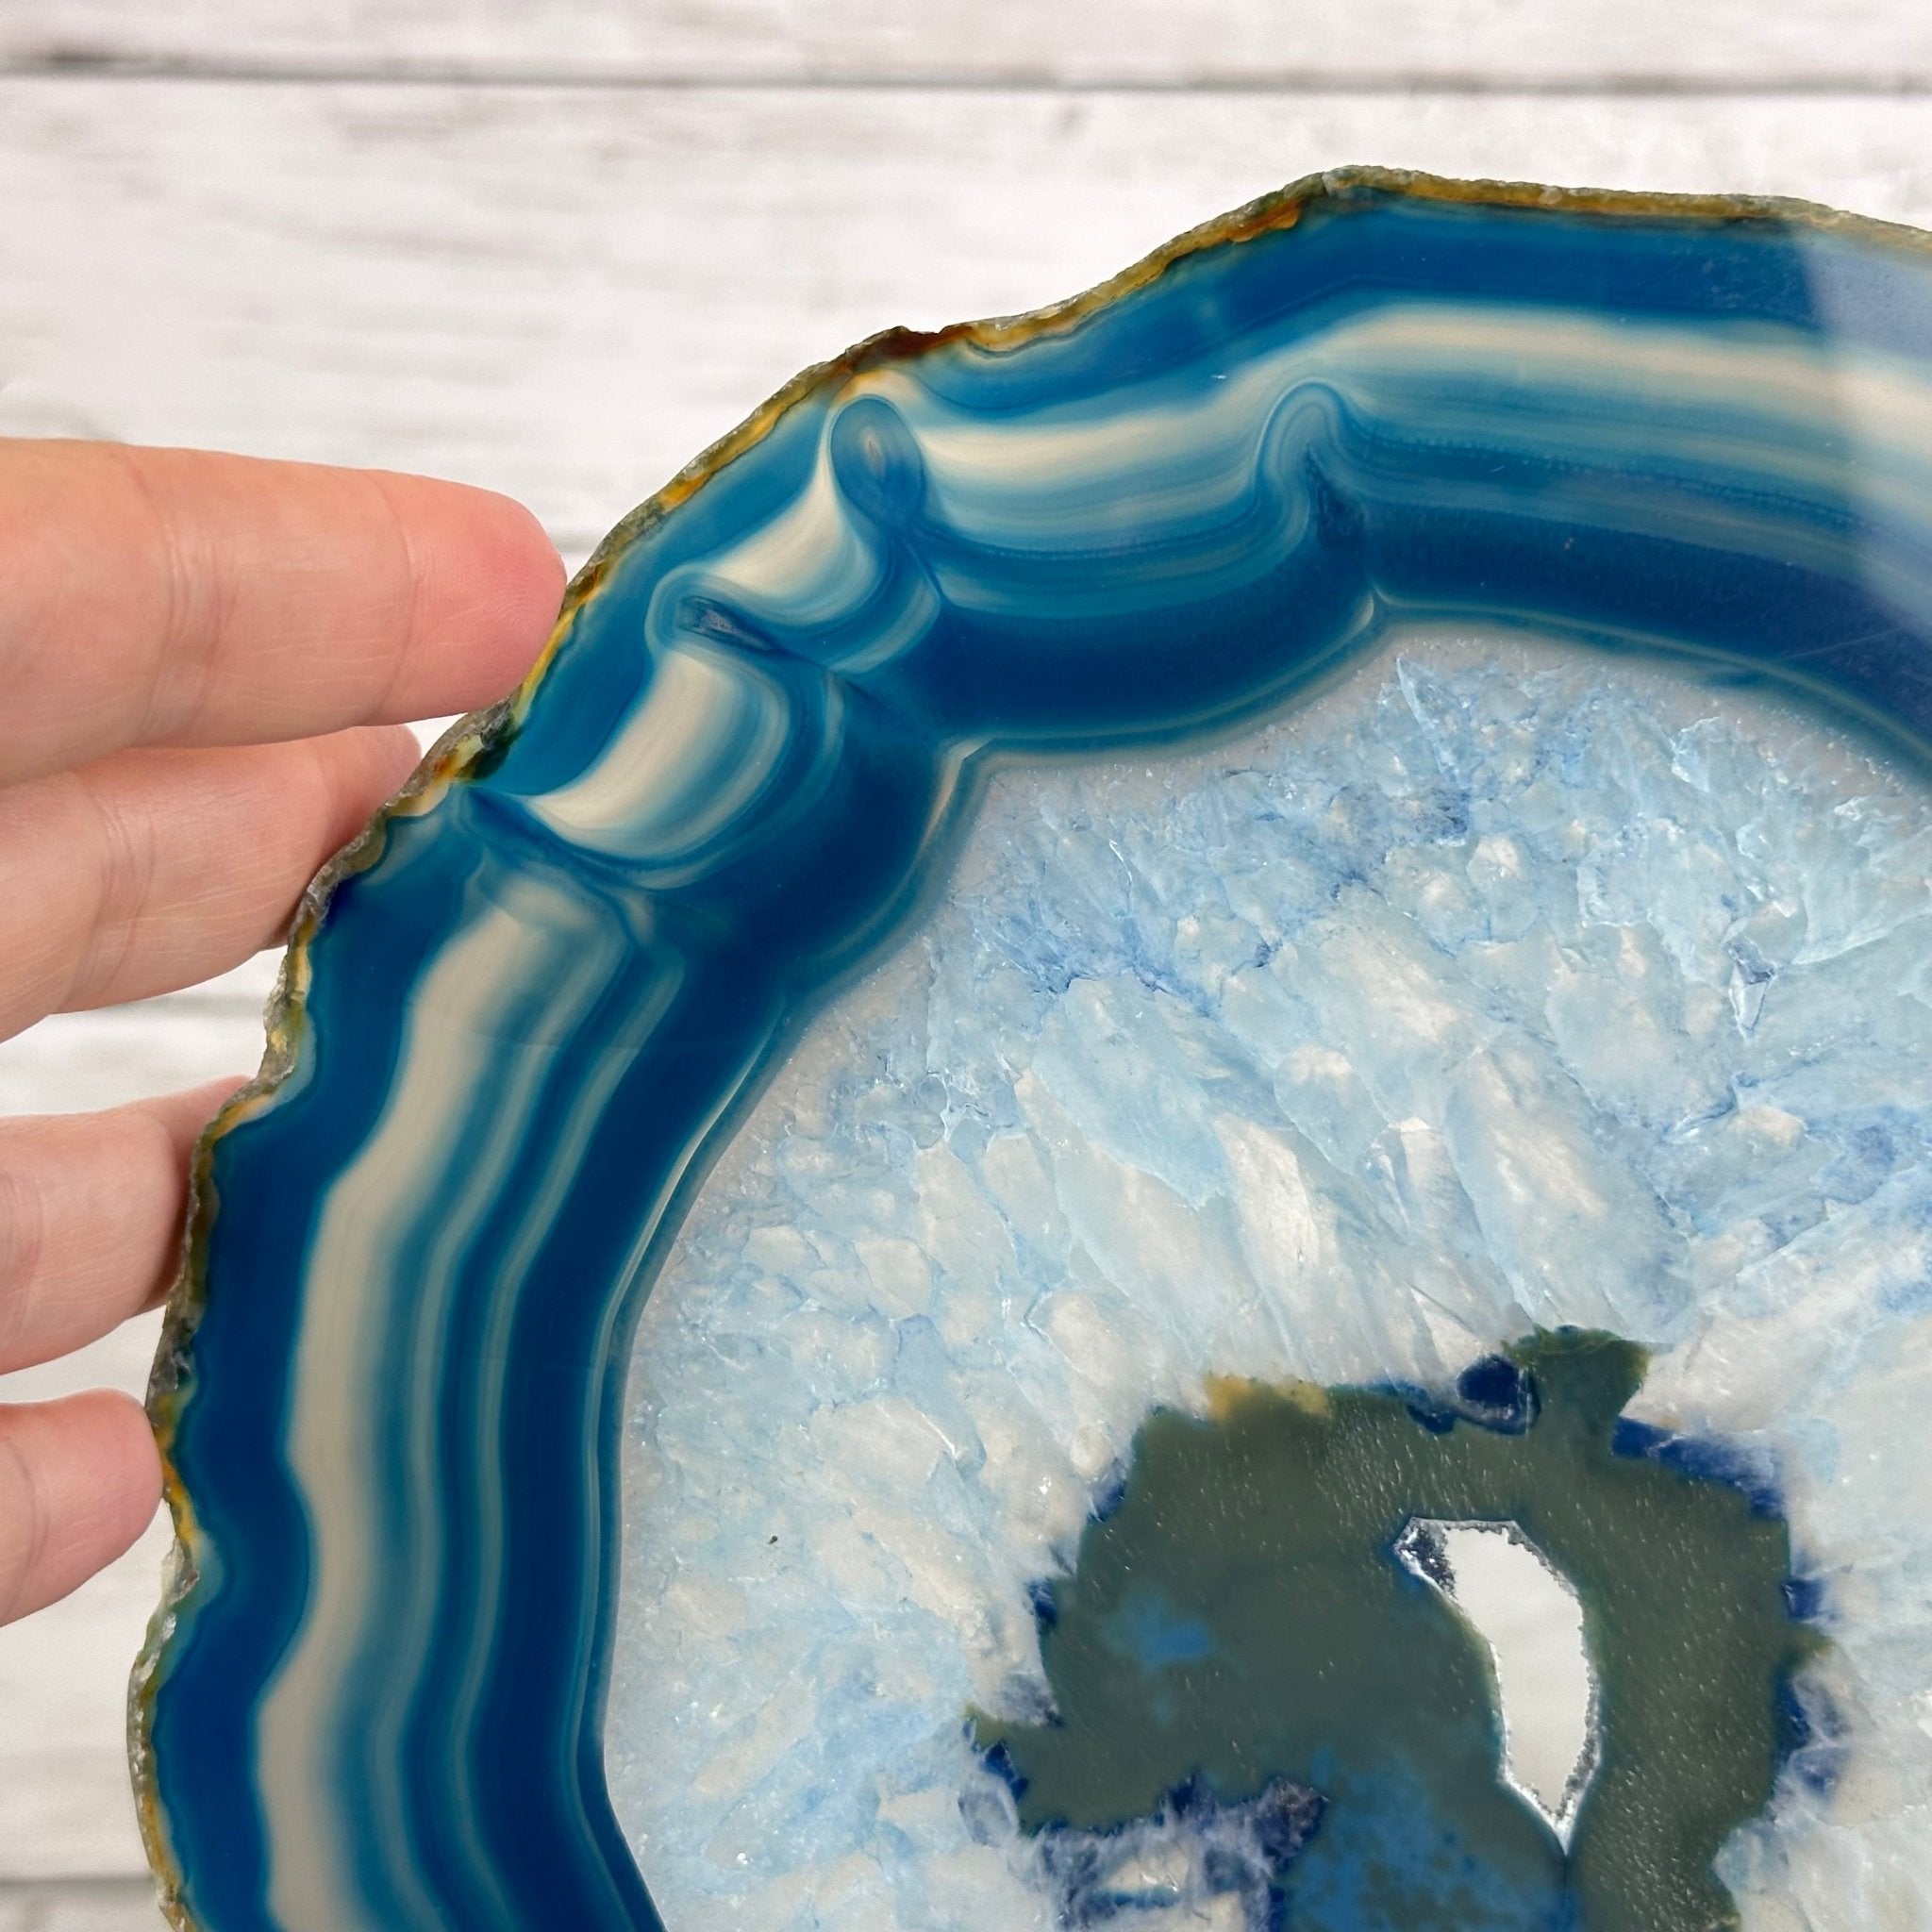 Brazilian Blue Agate Slice on a Metal Stand, 11.6" Tall #5055-0135 - Brazil GemsBrazil GemsBrazilian Blue Agate Slice on a Metal Stand, 11.6" Tall #5055-0135Slices on Fixed Bases5055-0135